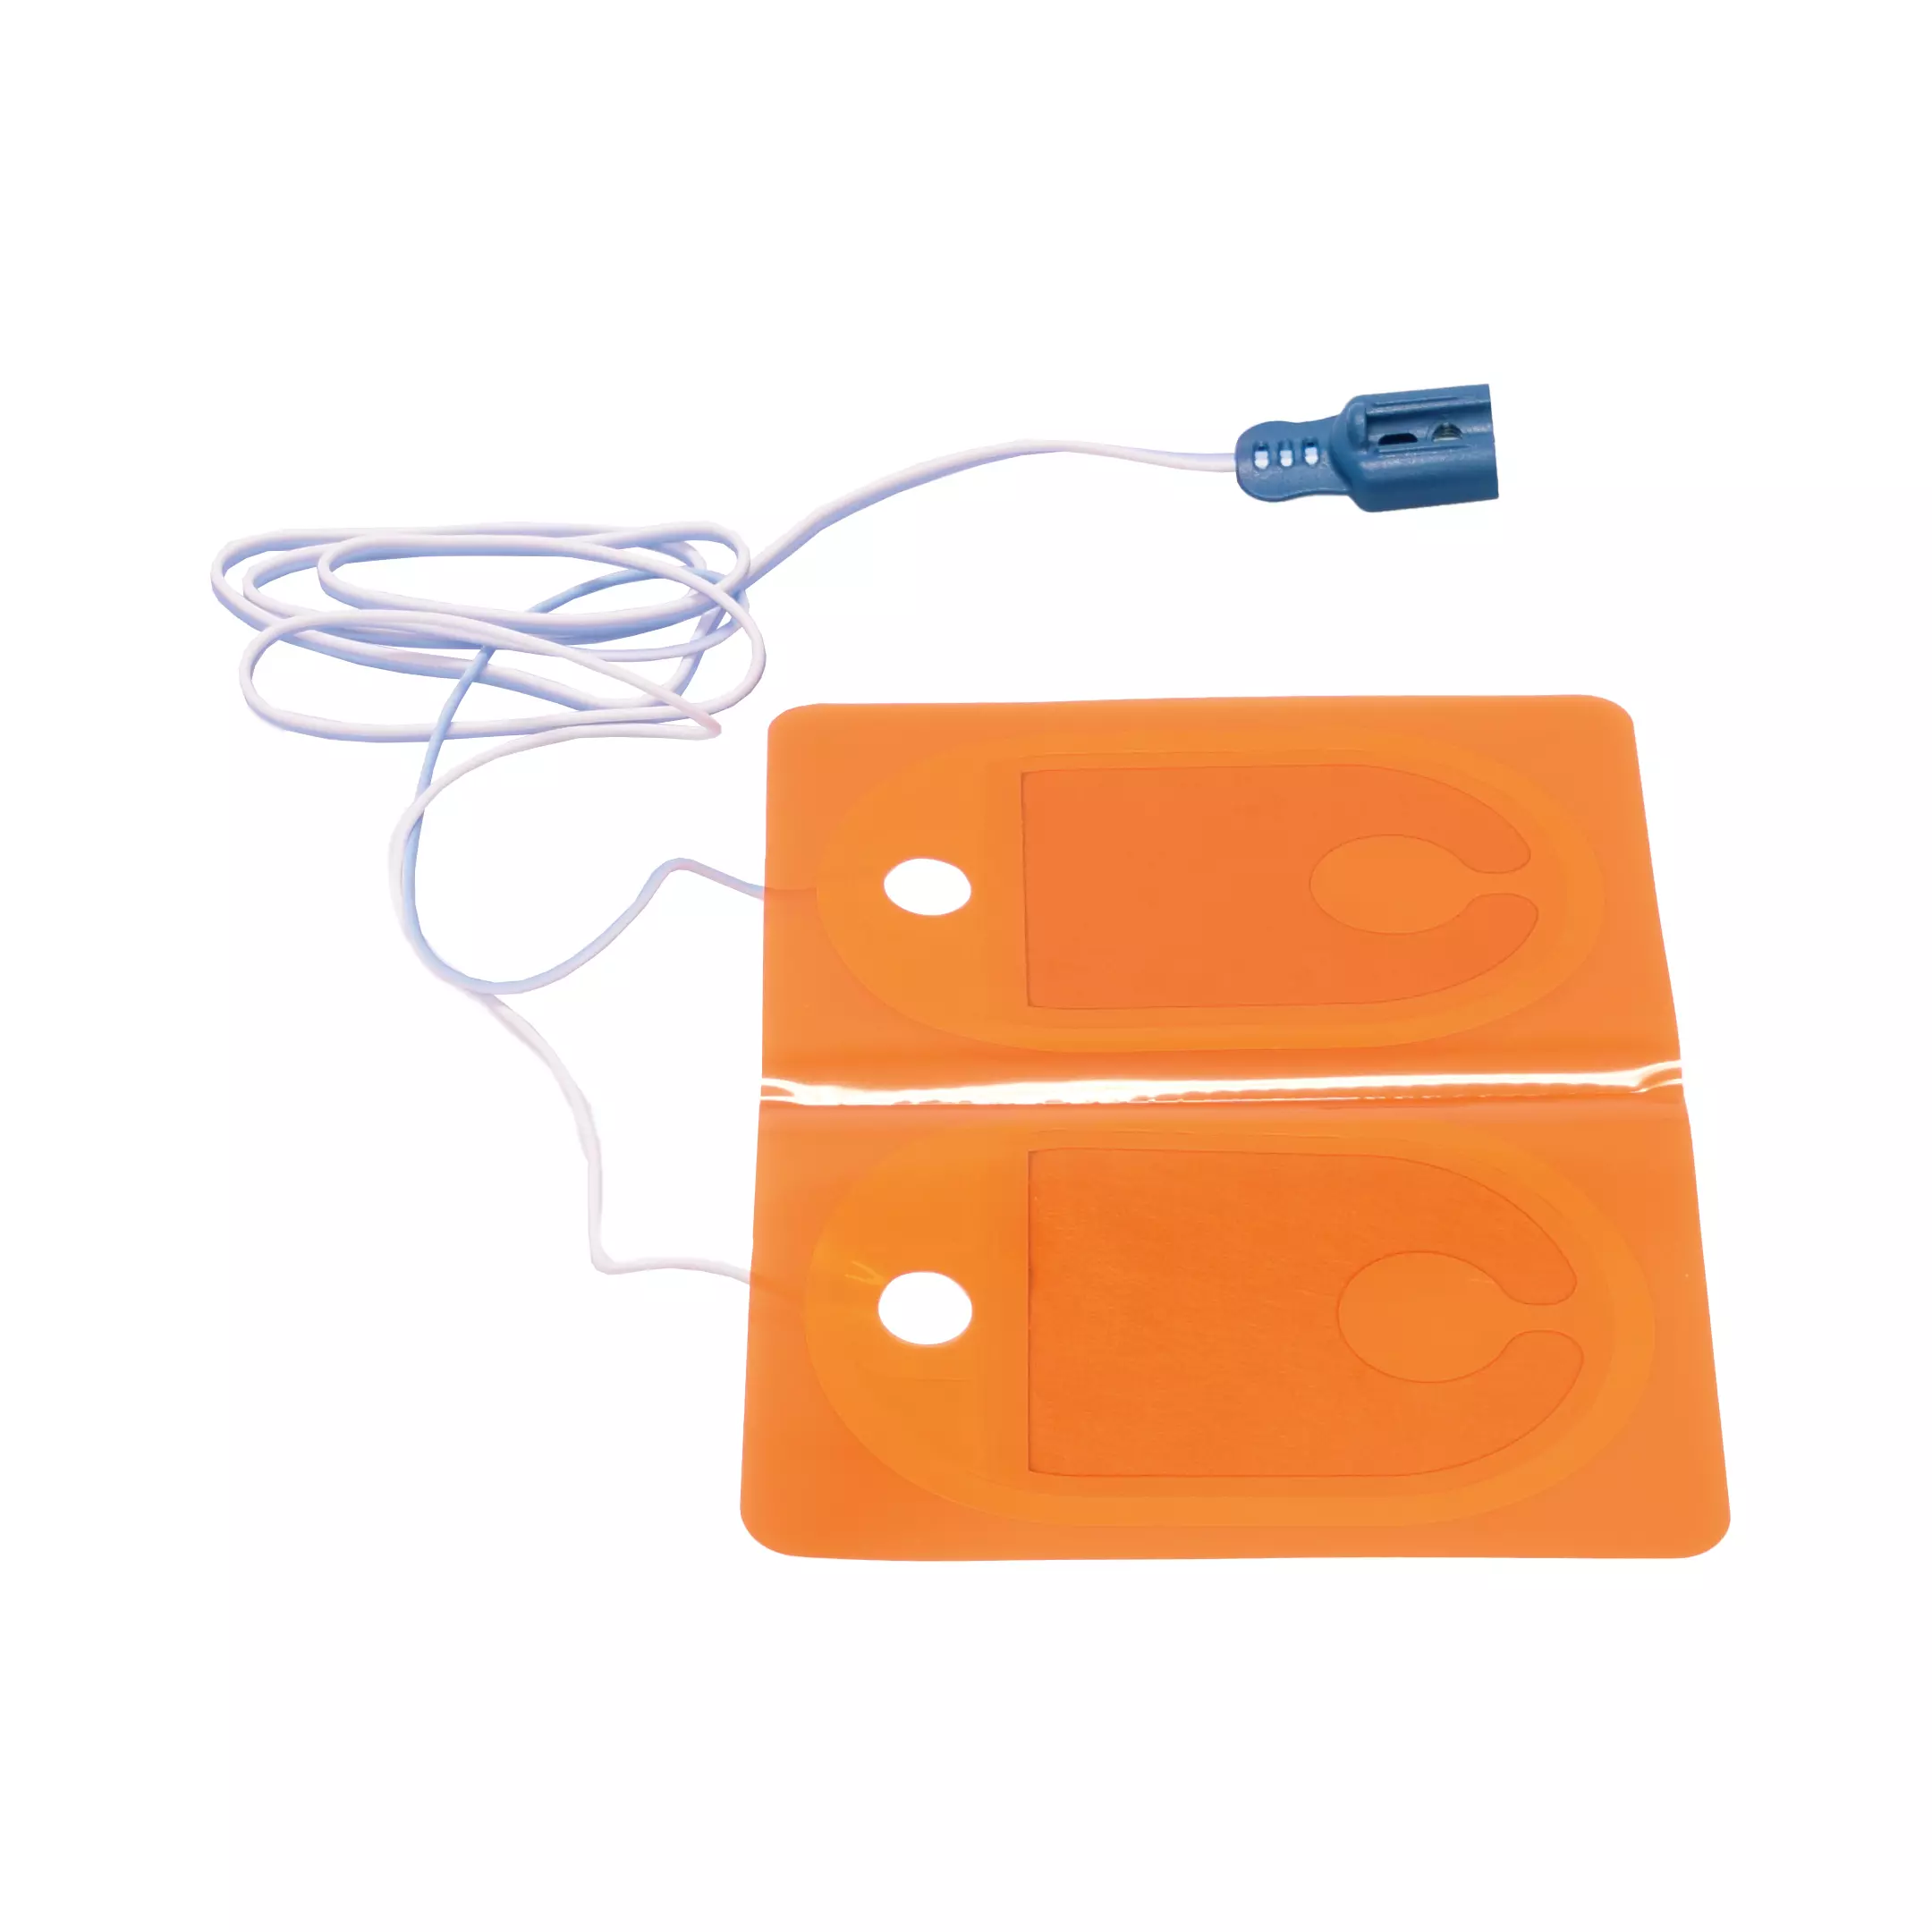 Adult defibrillation electrodes for Philips Heartstart FR2 and FR2+, 1 pair